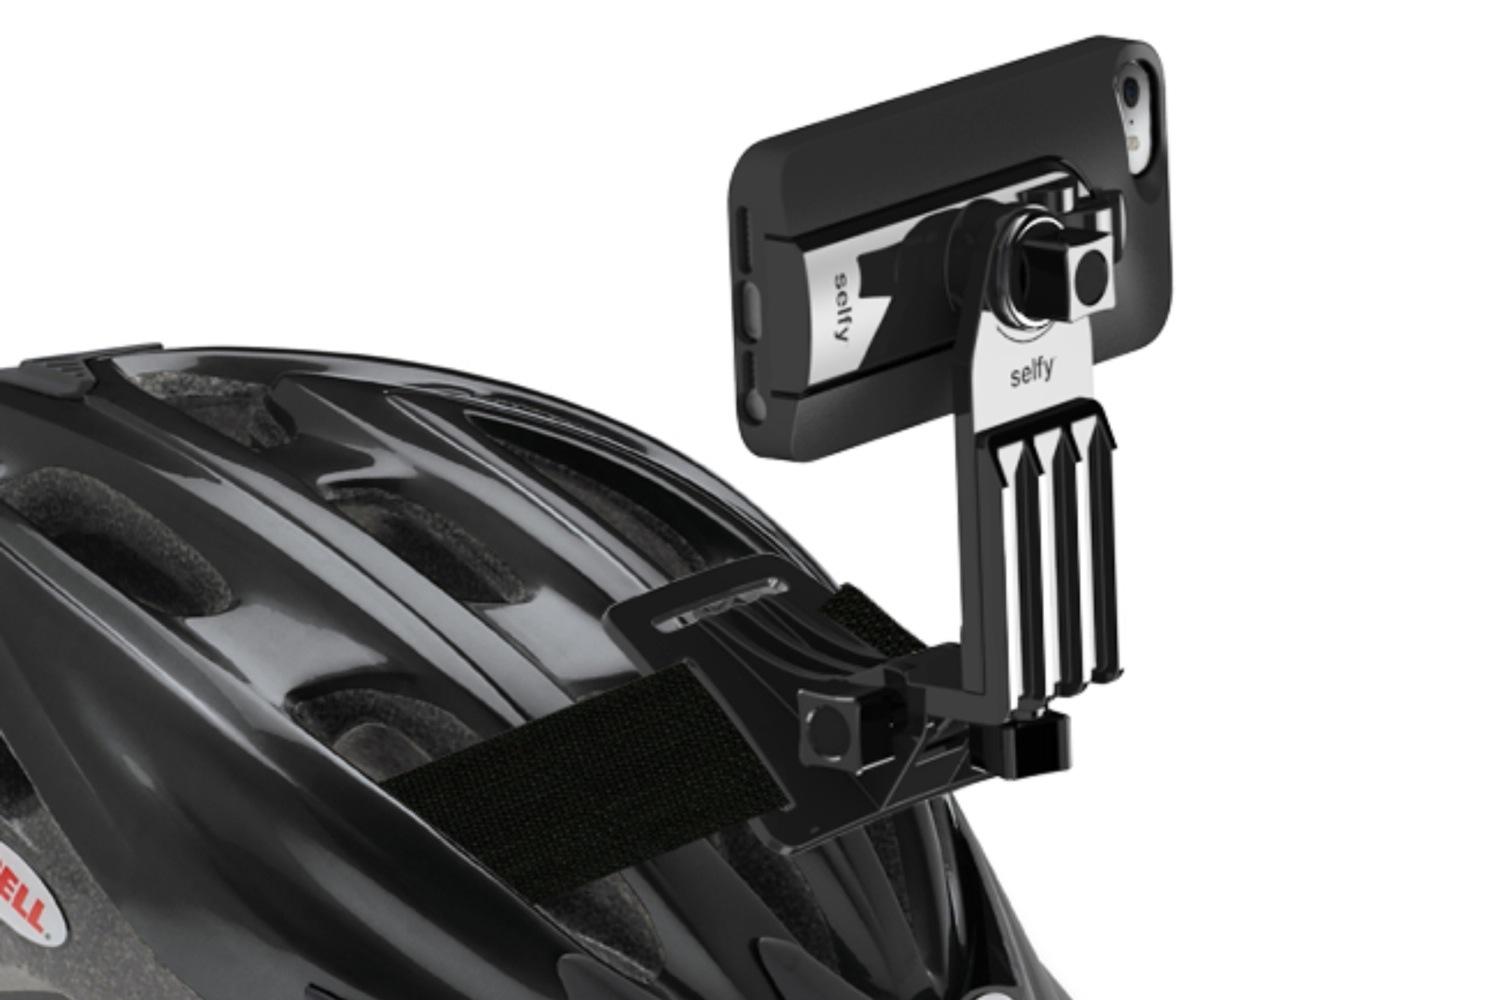 iluv smartphone case with built in remote shutter designed for the selfie obsessed selfy helmet 2